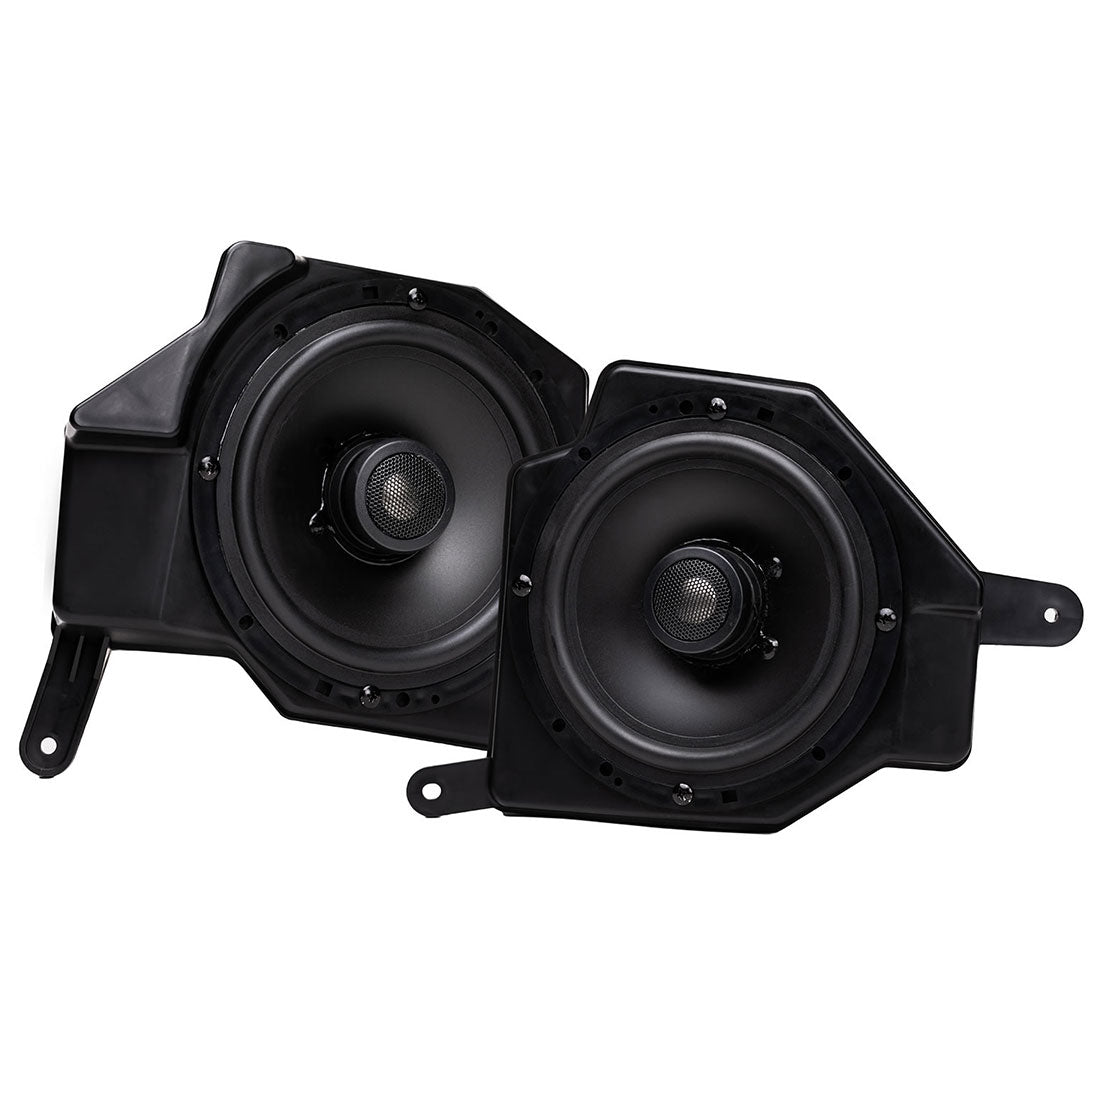 MB Quart JC1-116E 6.5" Coaxial Front Lower Dash Speaker System for 2018-up Wrangler or 2020-up Gladiator